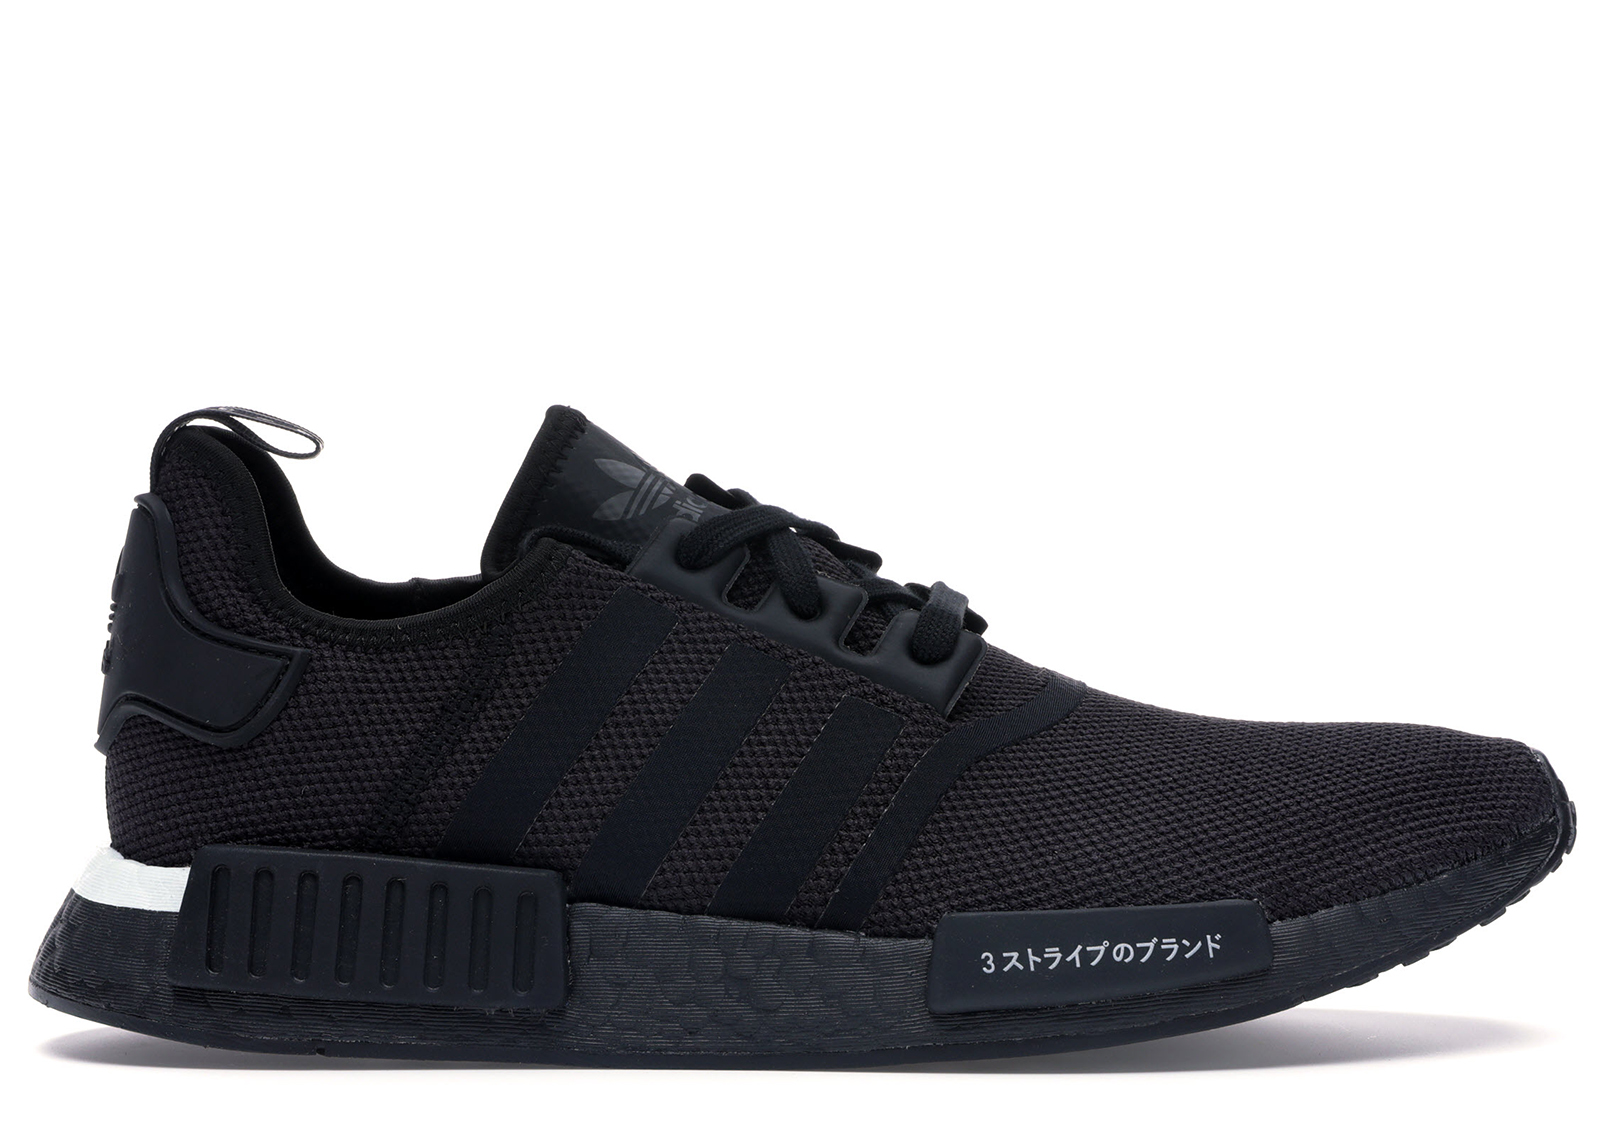 nmd black and white japan